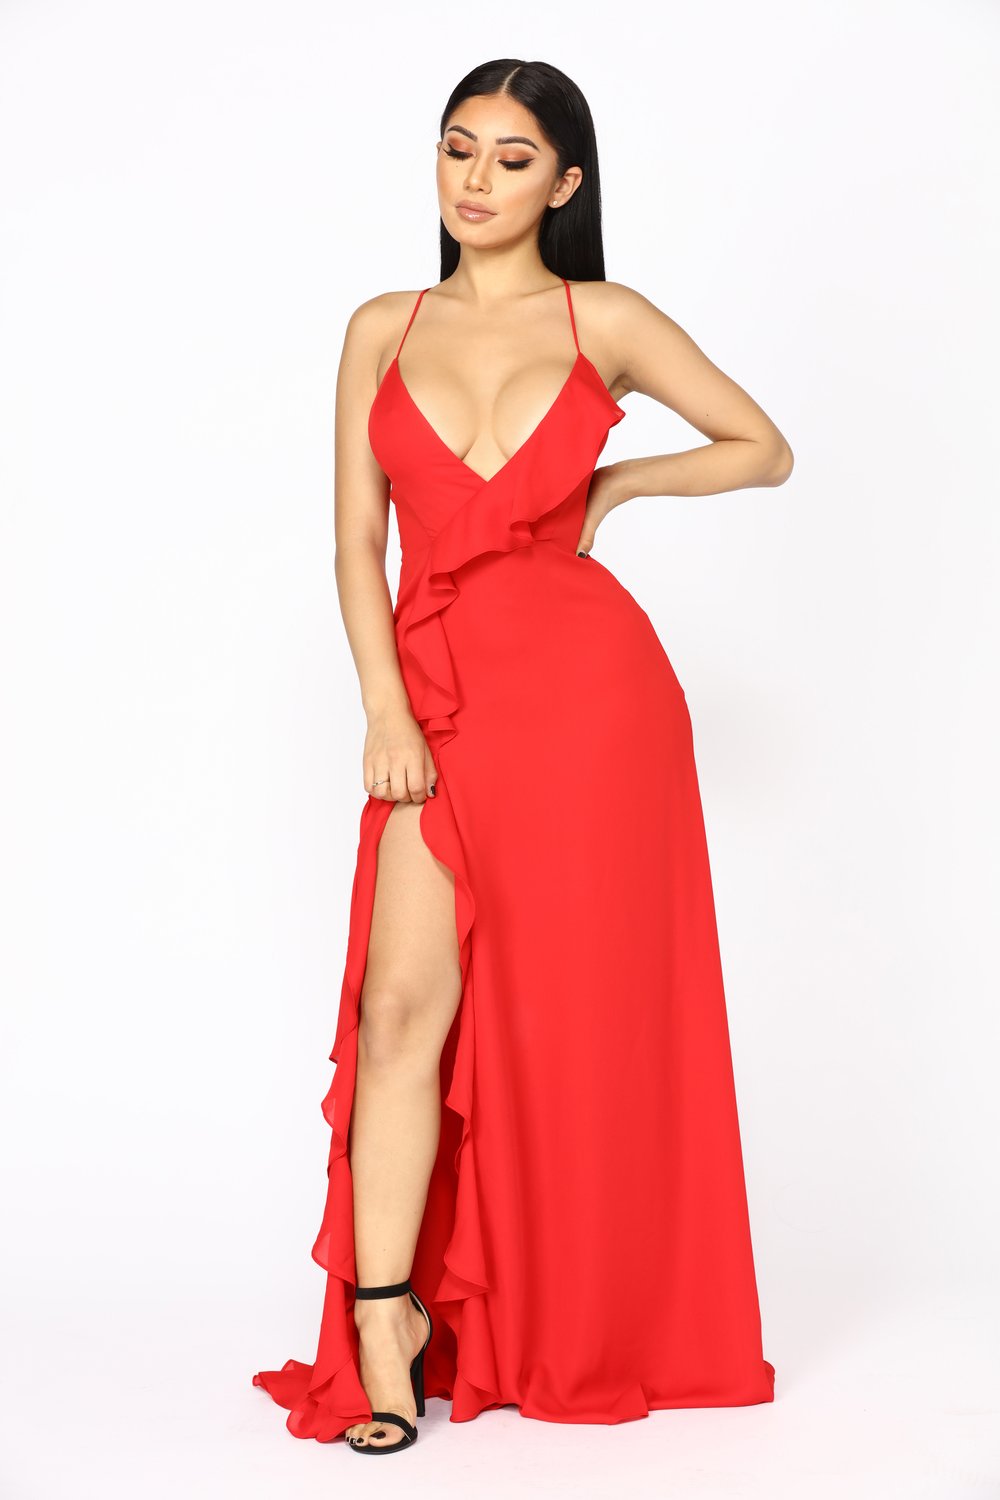 Valentine's Day Date Outfit Ideas From Fashion Nova - Frugal ...